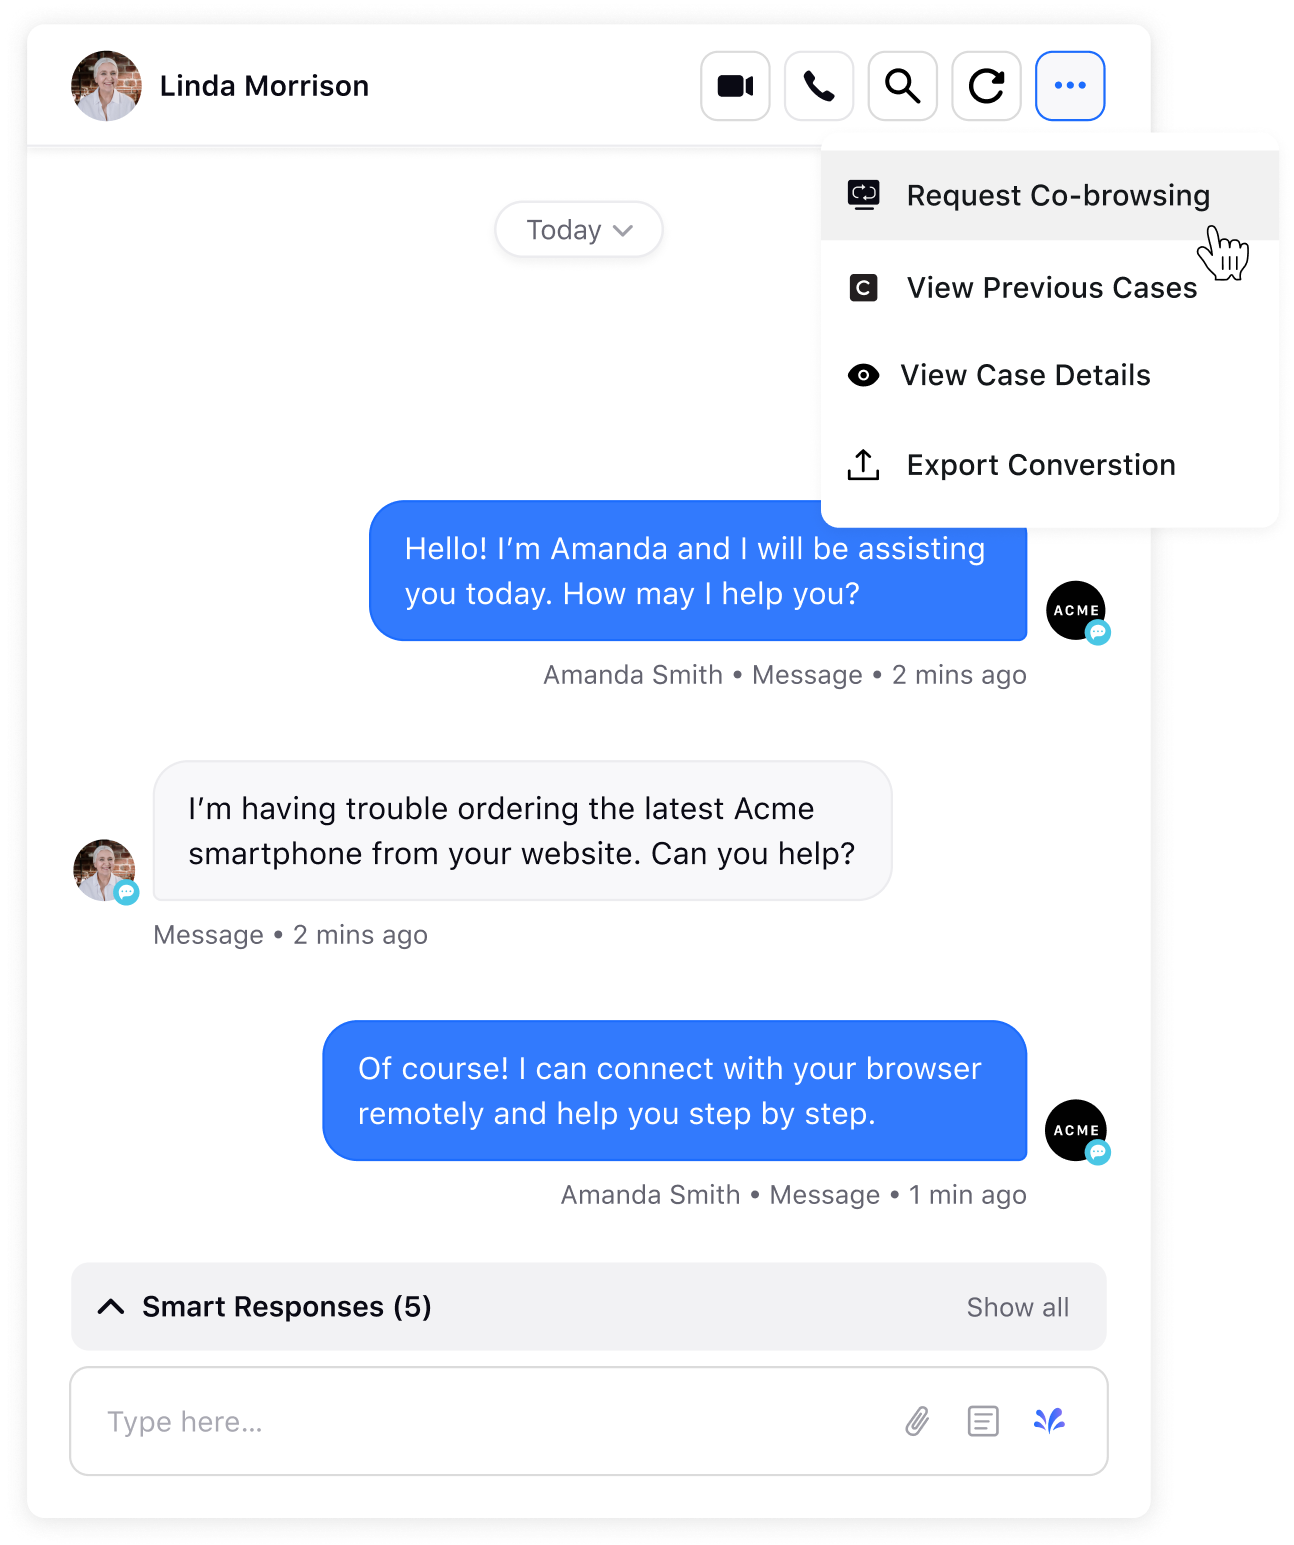 Live chat screenshot of a chatbot and customer conversation for troubleshooting